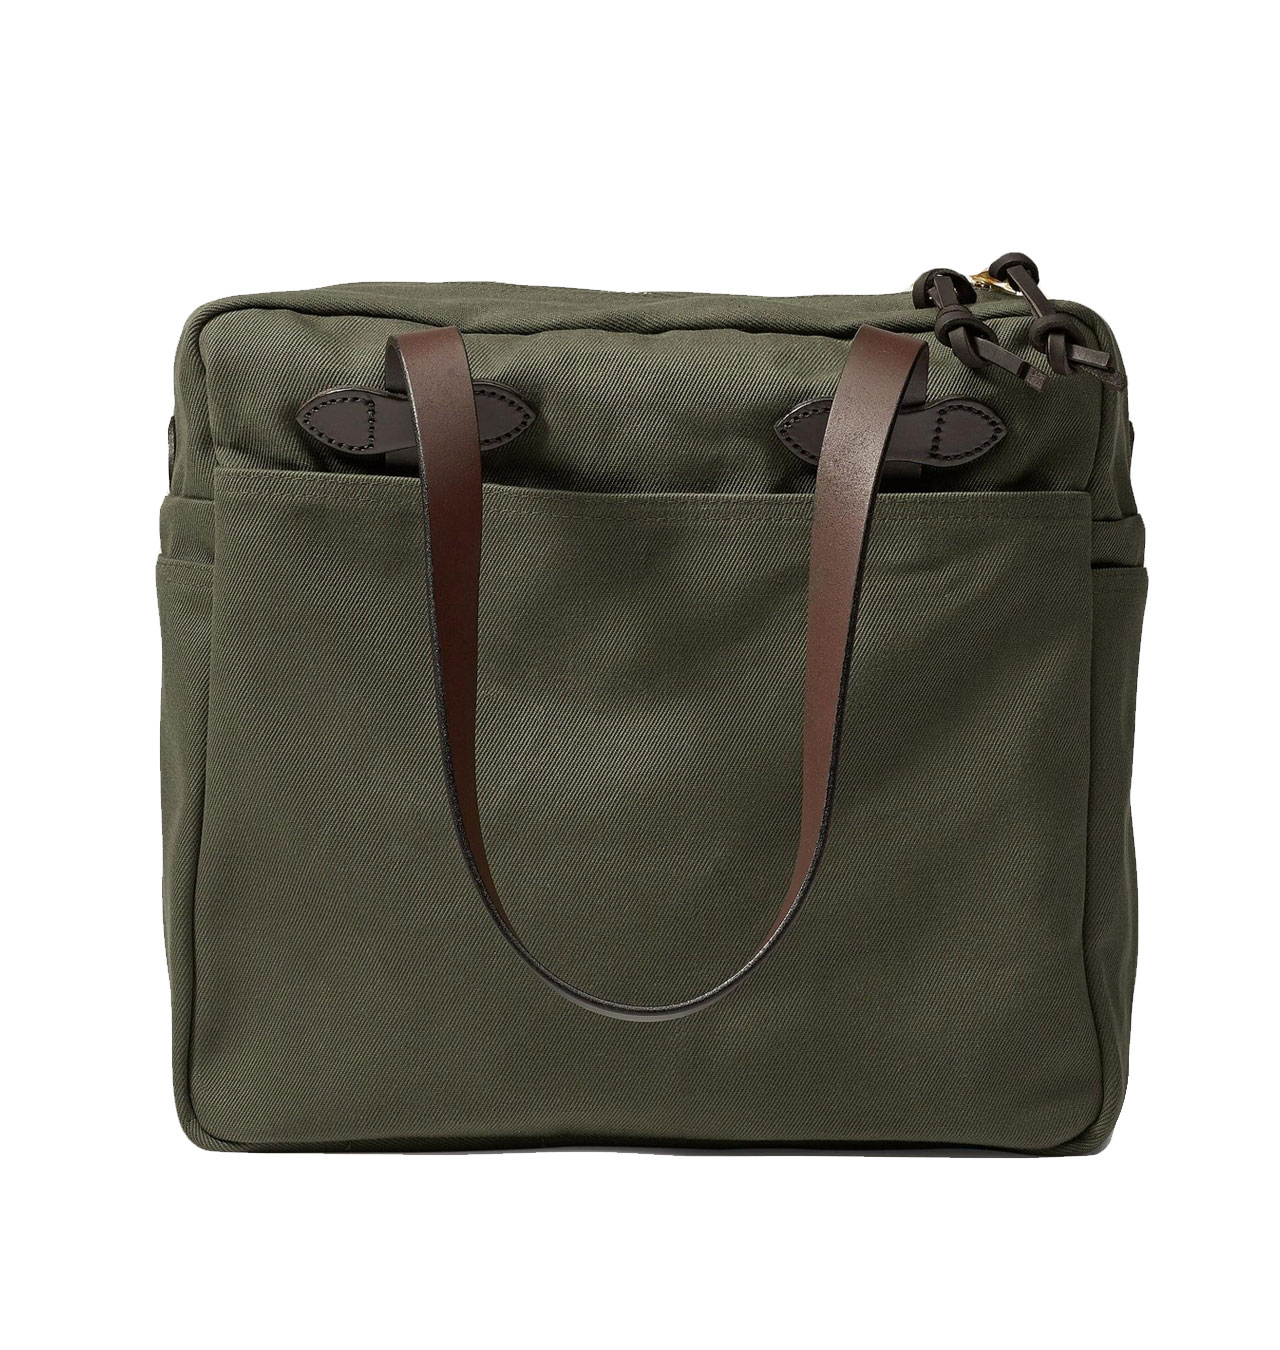 Filson - Tote Bag With Zipper - Otter Green